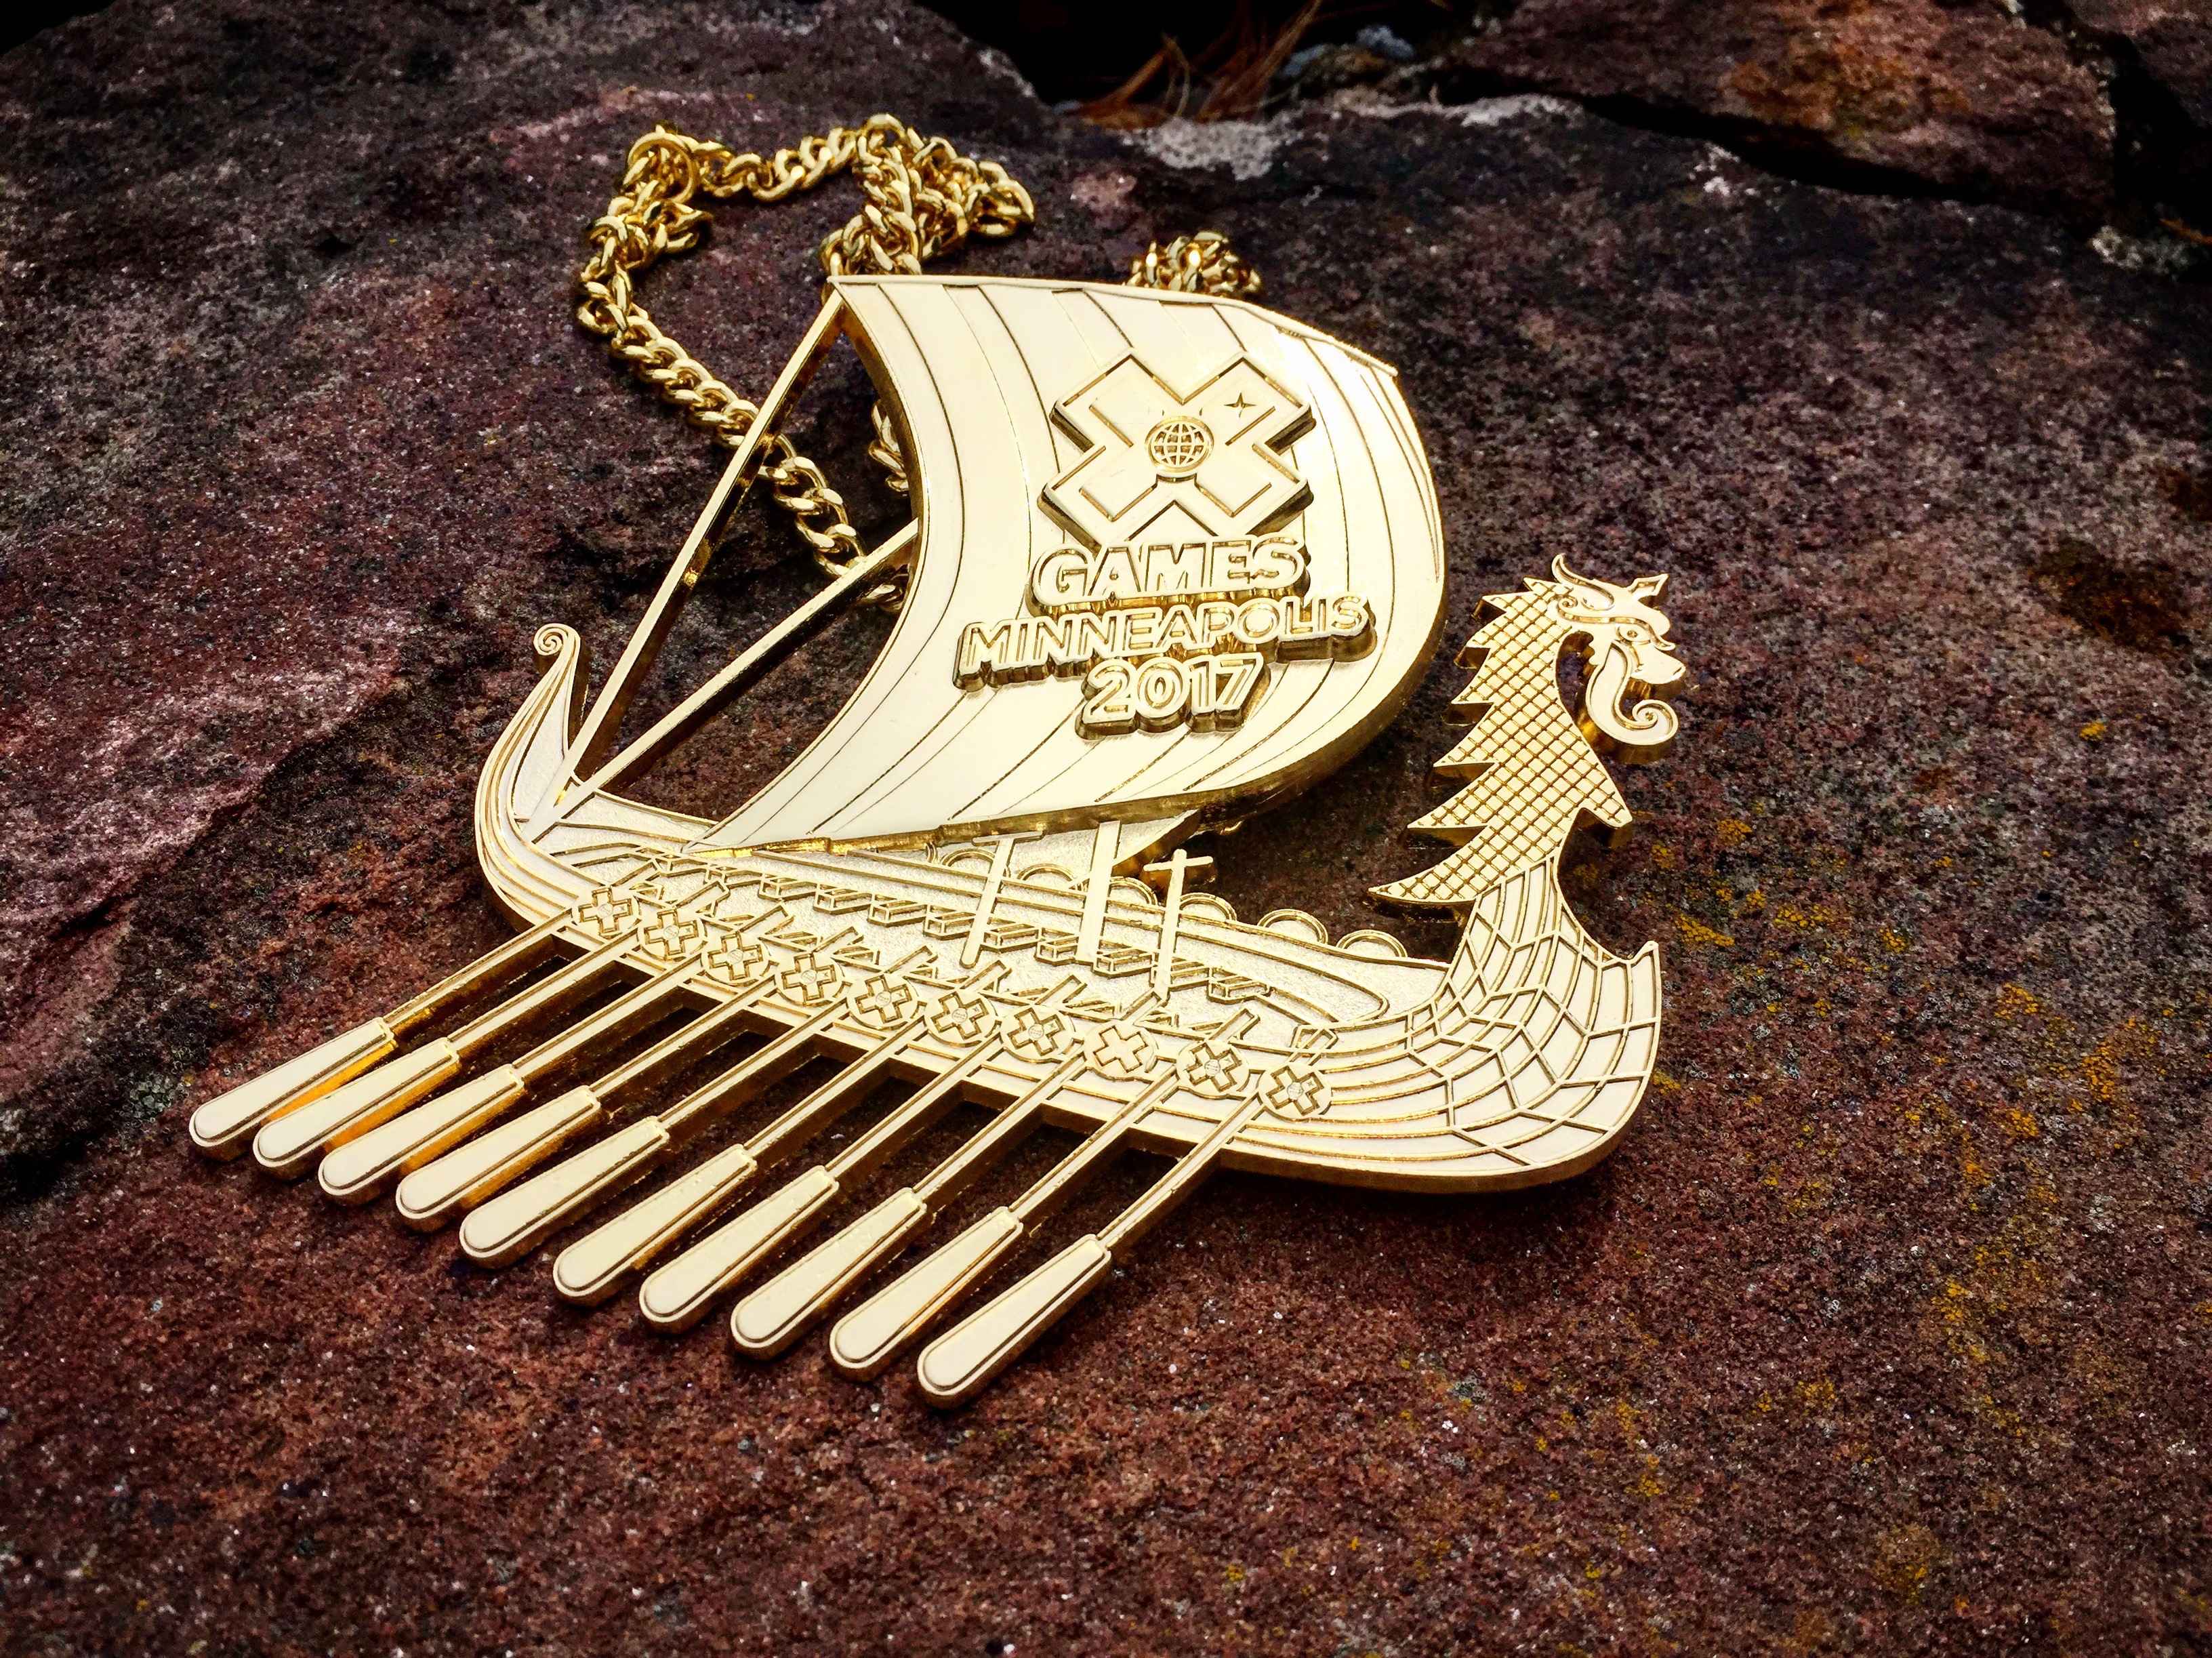 A close-up of the X Games Minneapolis gold medal.